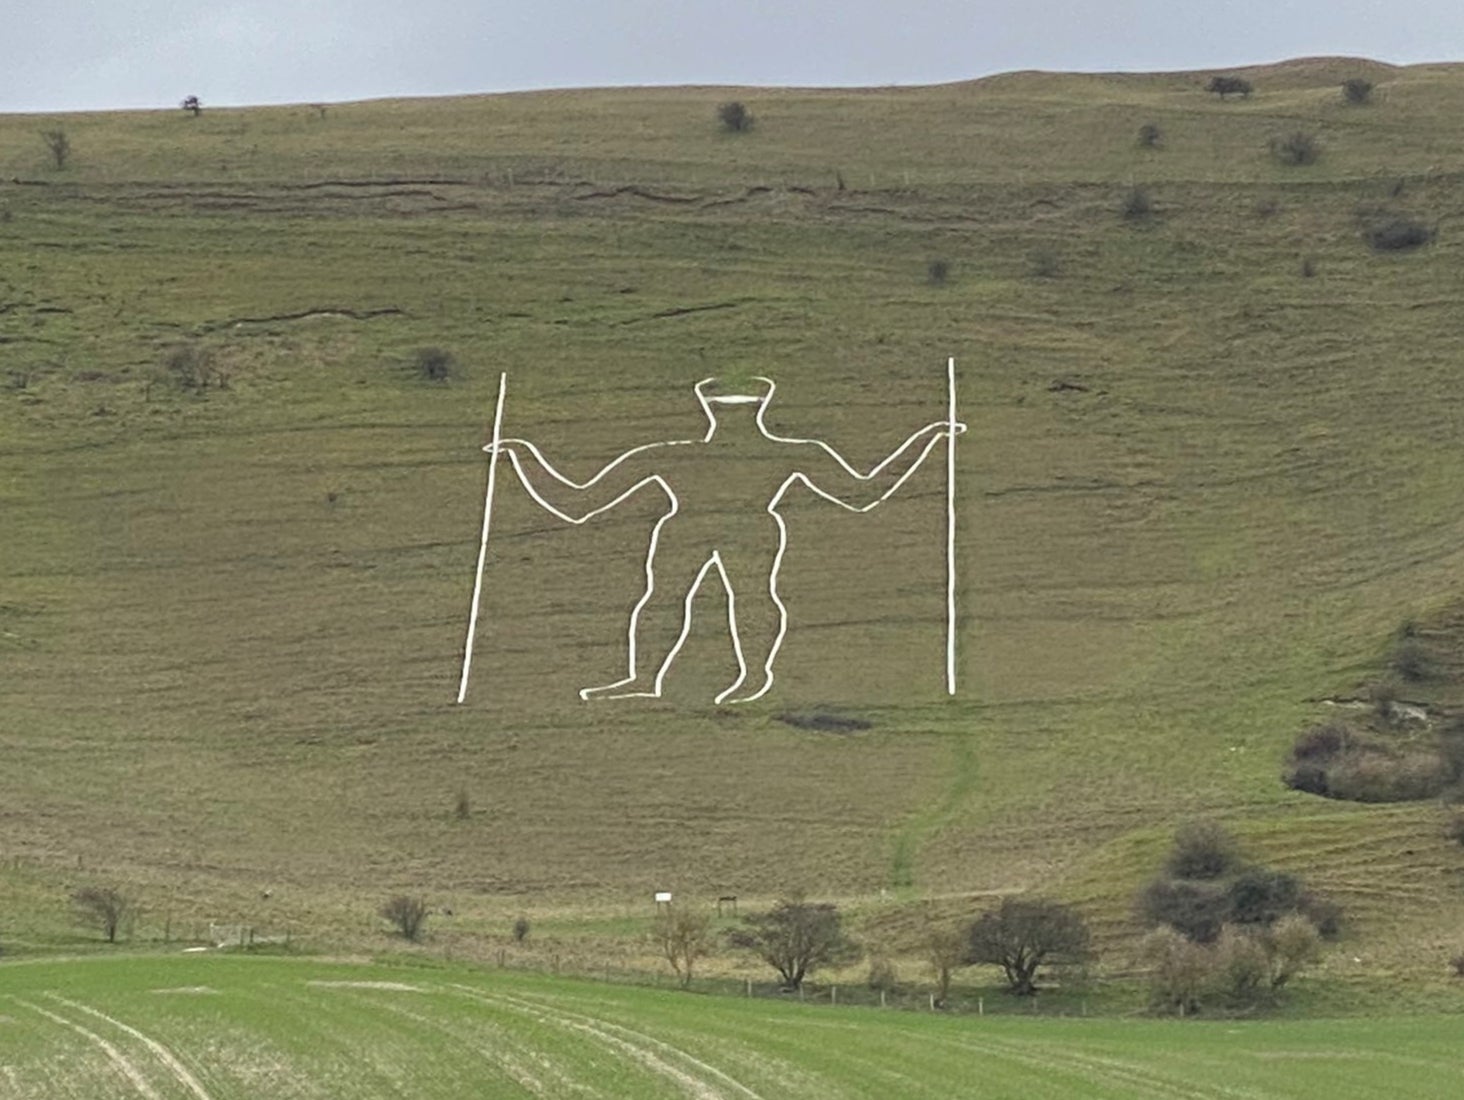 The mask was painted on the figure carved into the chalk hillside